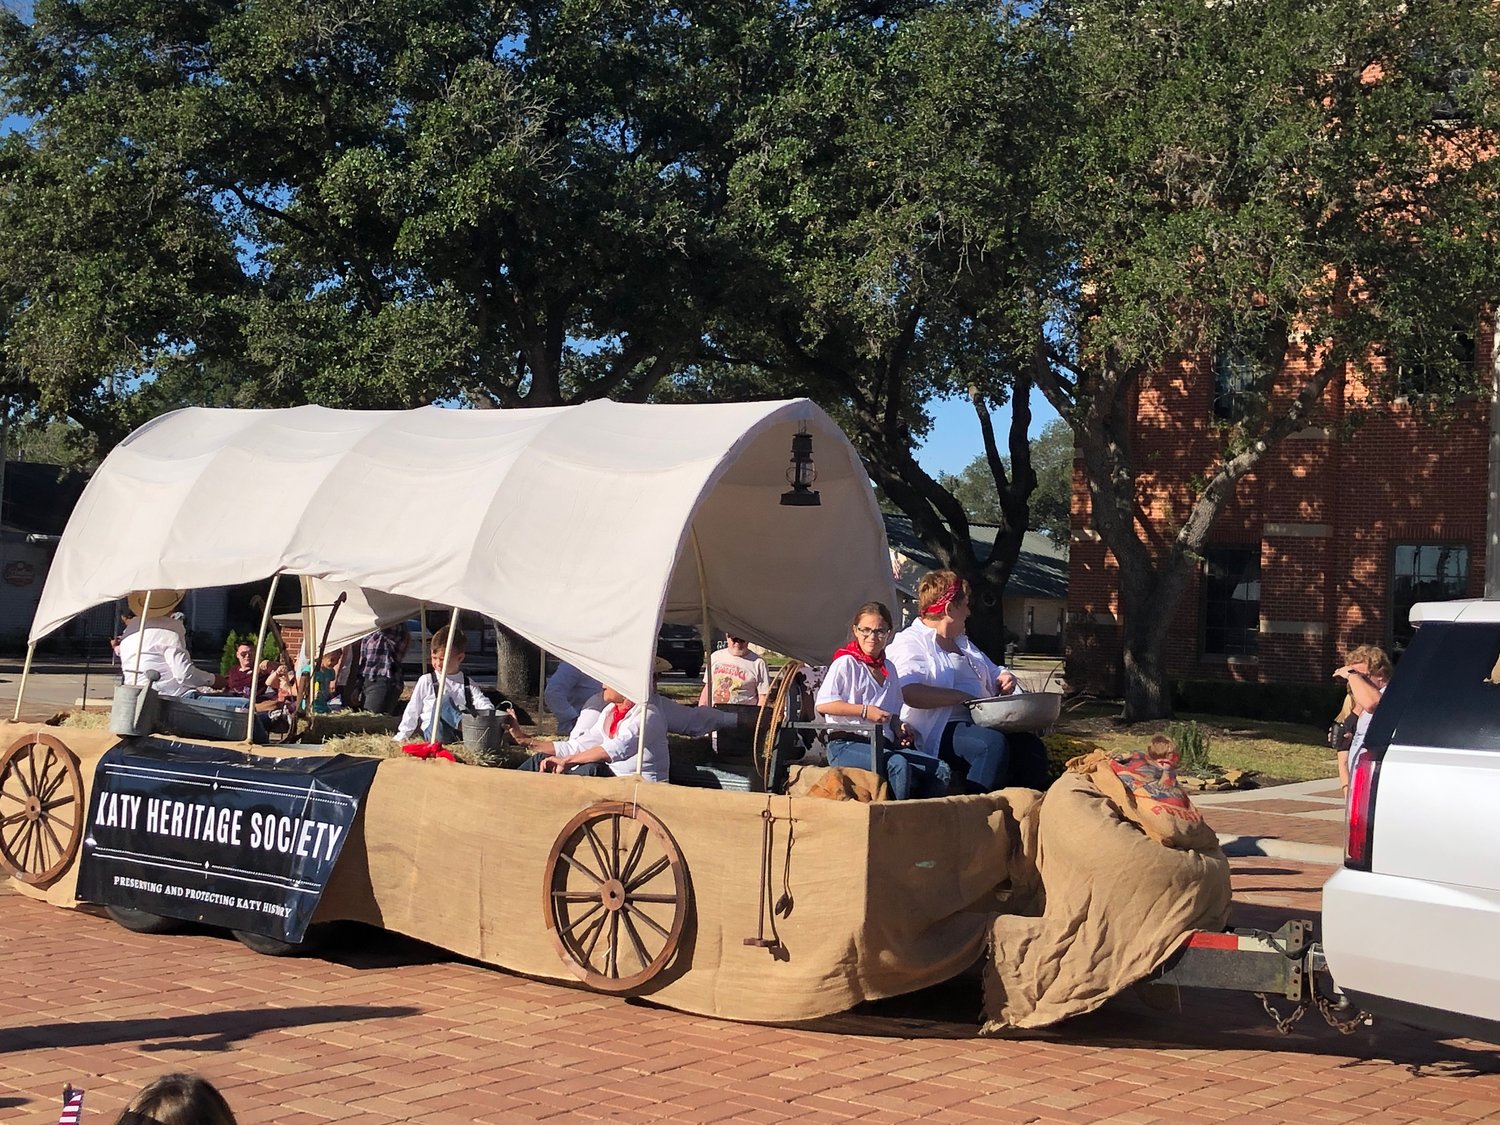 The Katy Heritage Society rode their "wagon" during the parade.